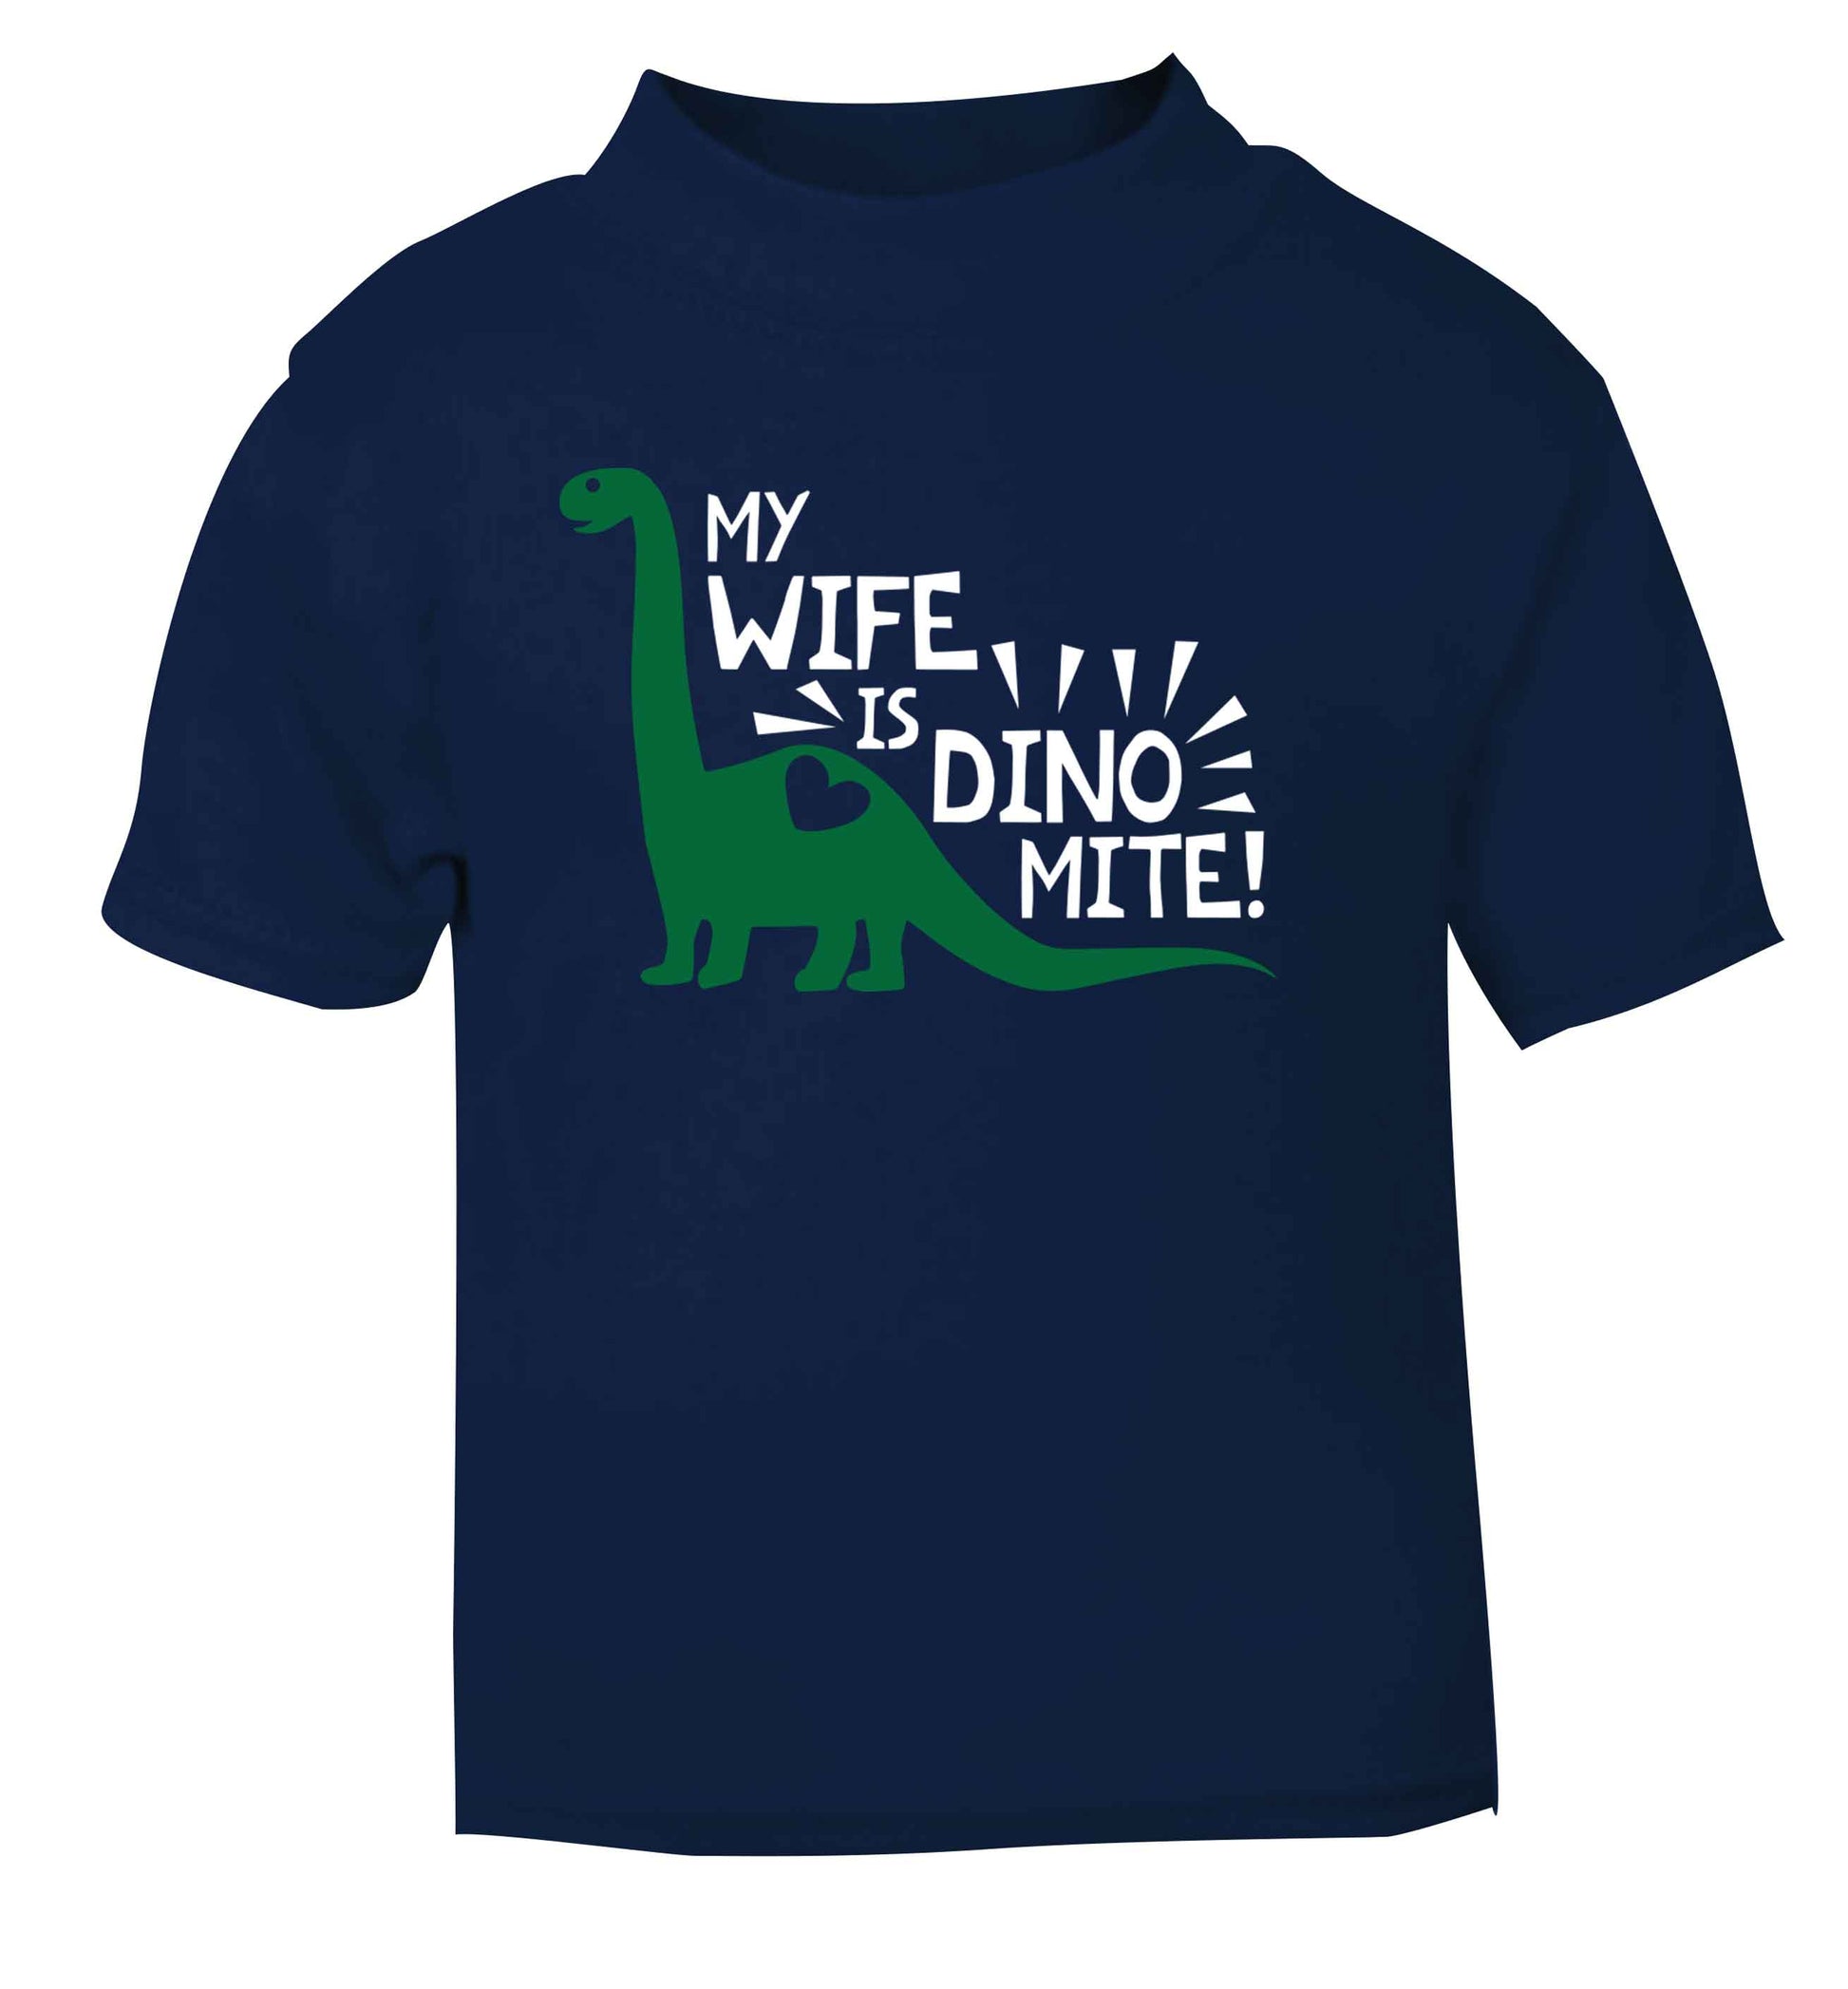 My wife is dinomite! navy Baby Toddler Tshirt 2 Years